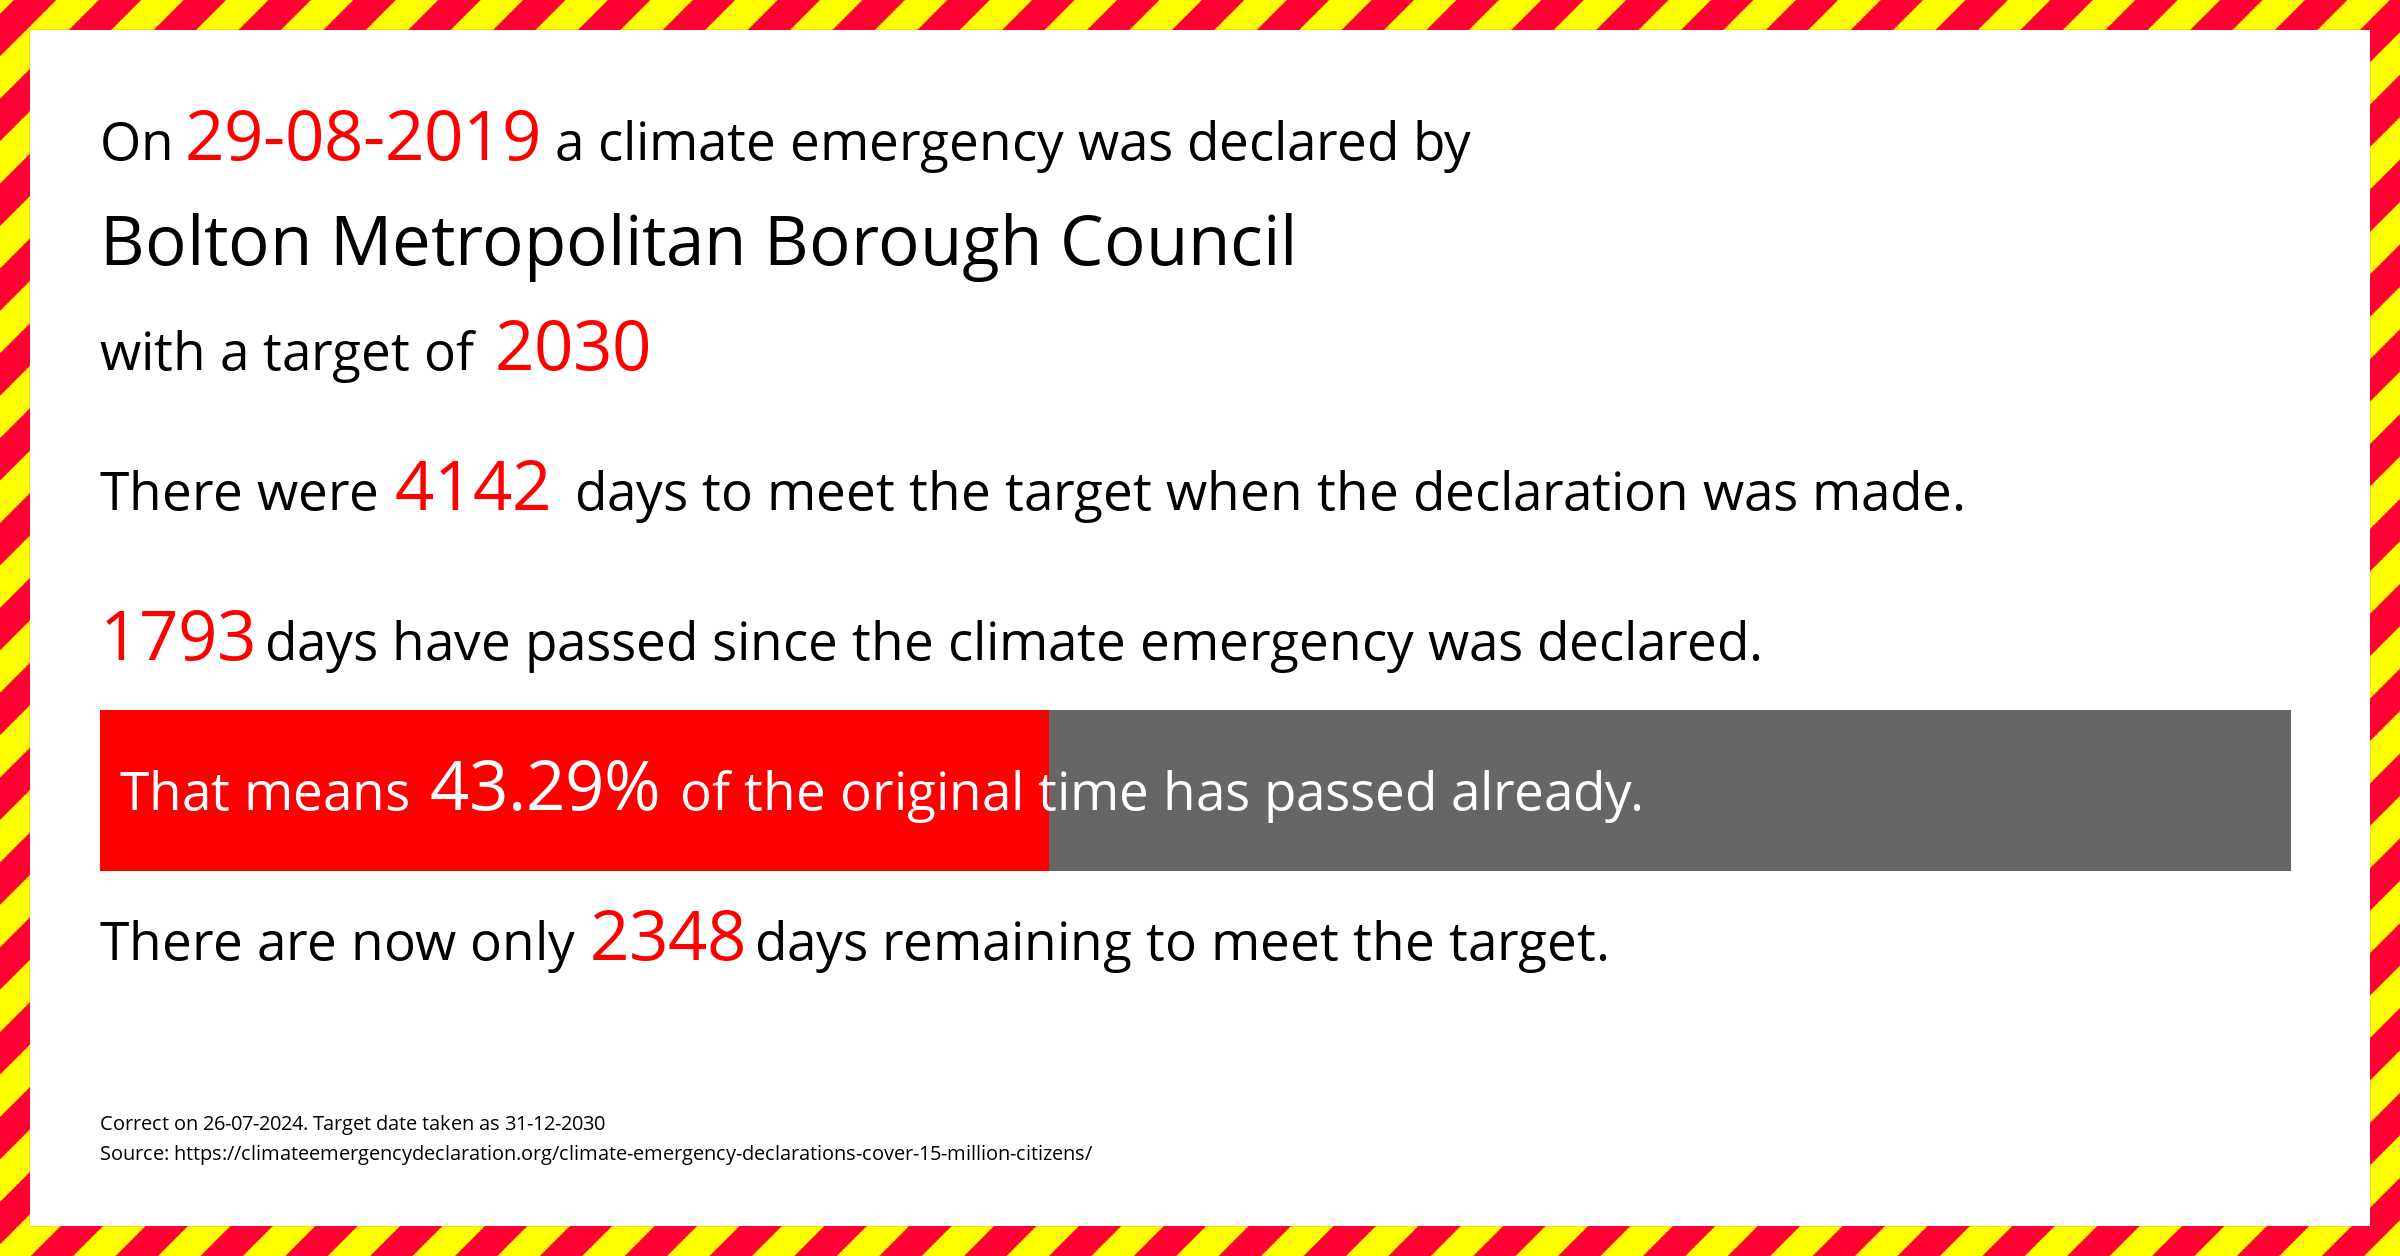 Bolton Metropolitan Borough Council declared a Climate emergency on Thursday 29th August 2019, with a target of 2030.